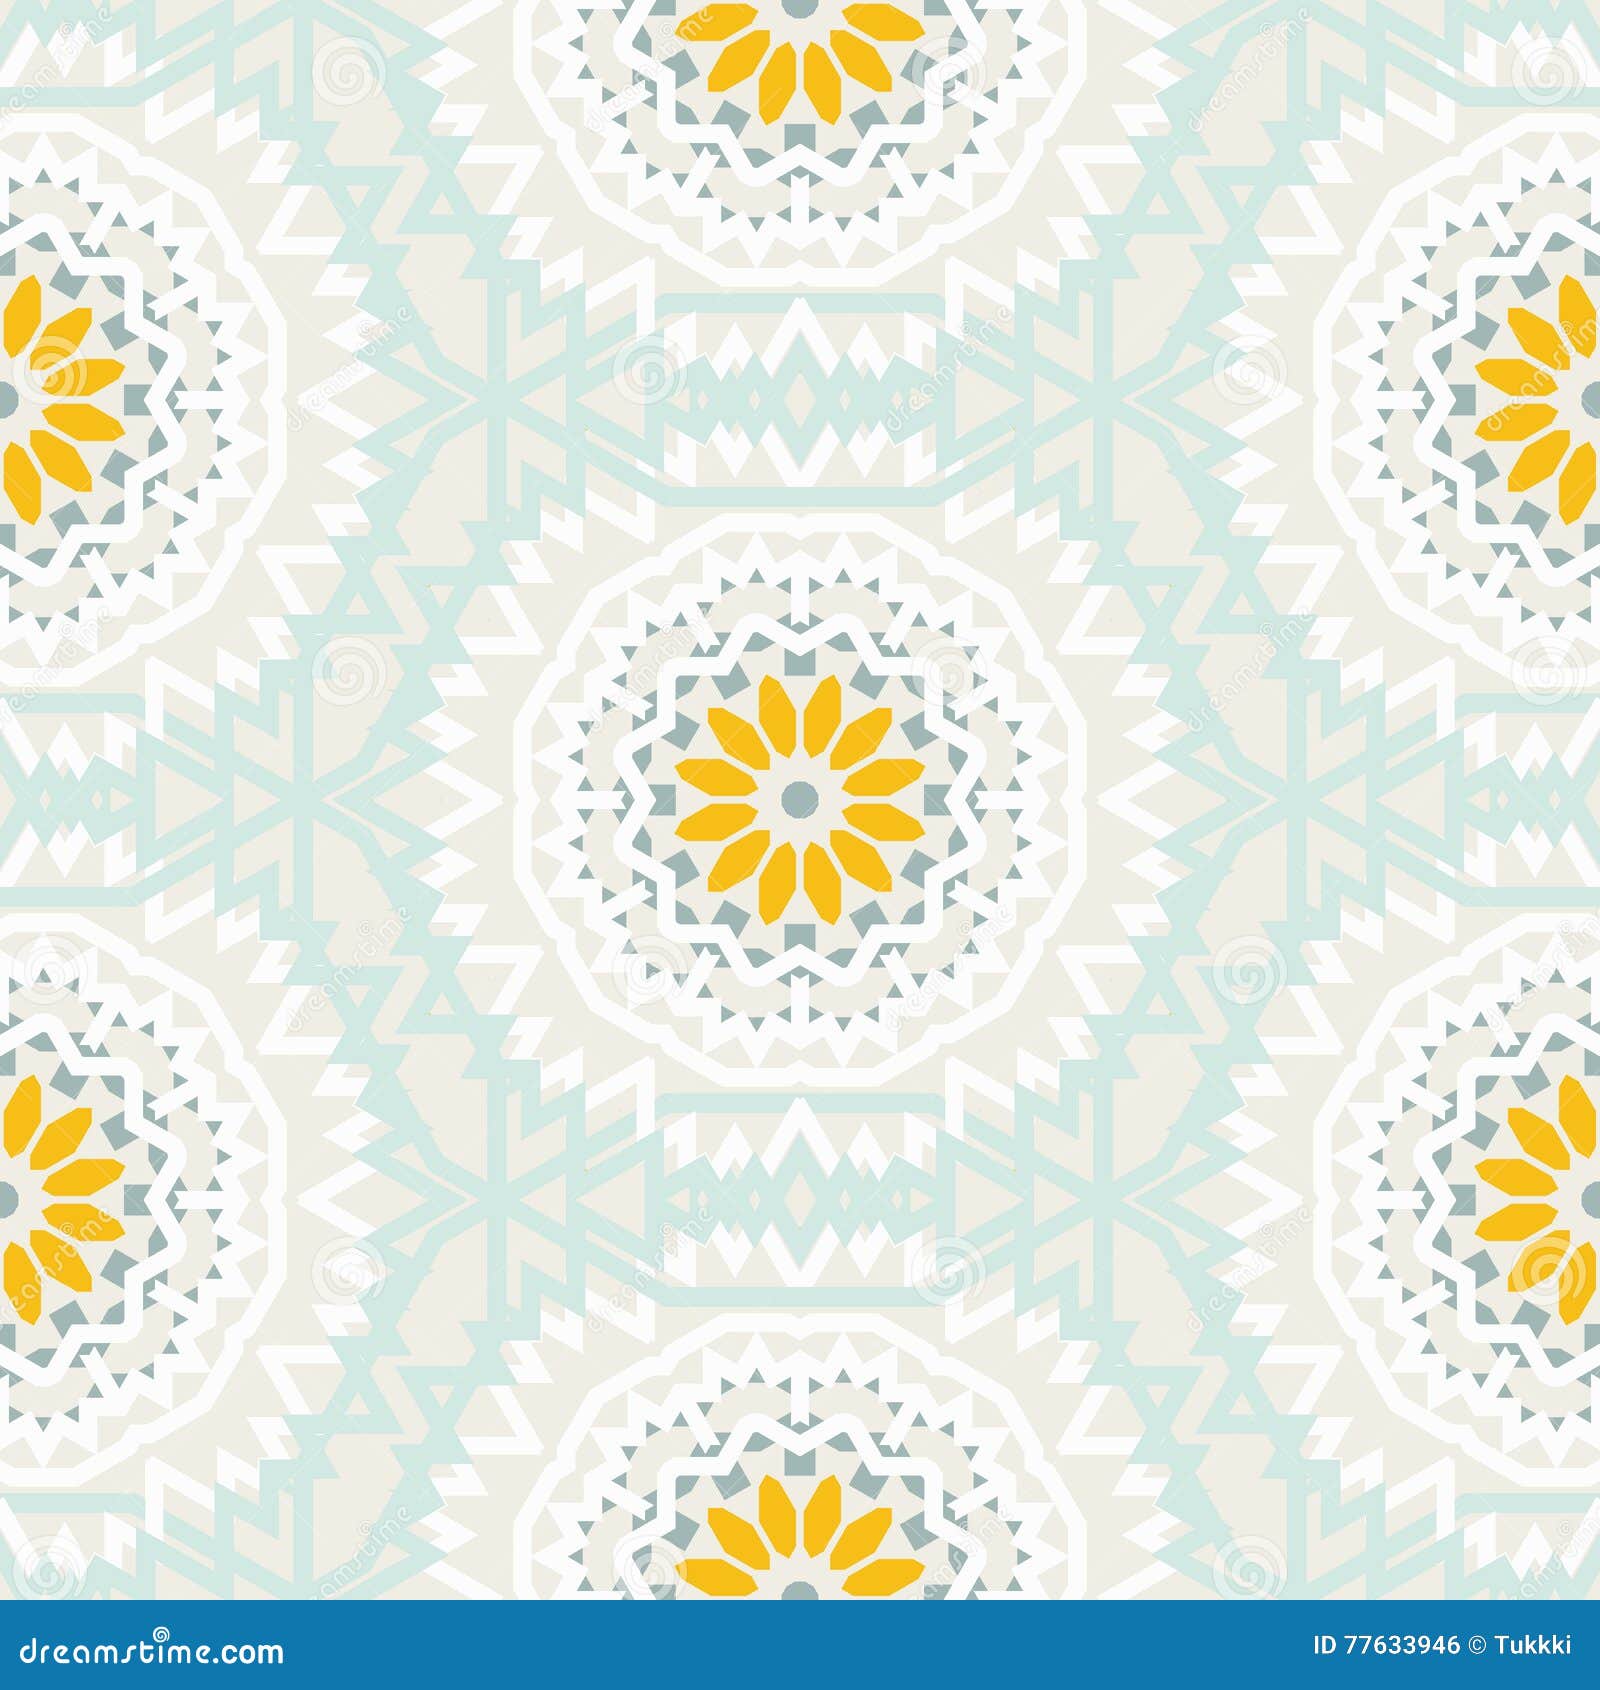 bohemian pattern with big abstract flowers